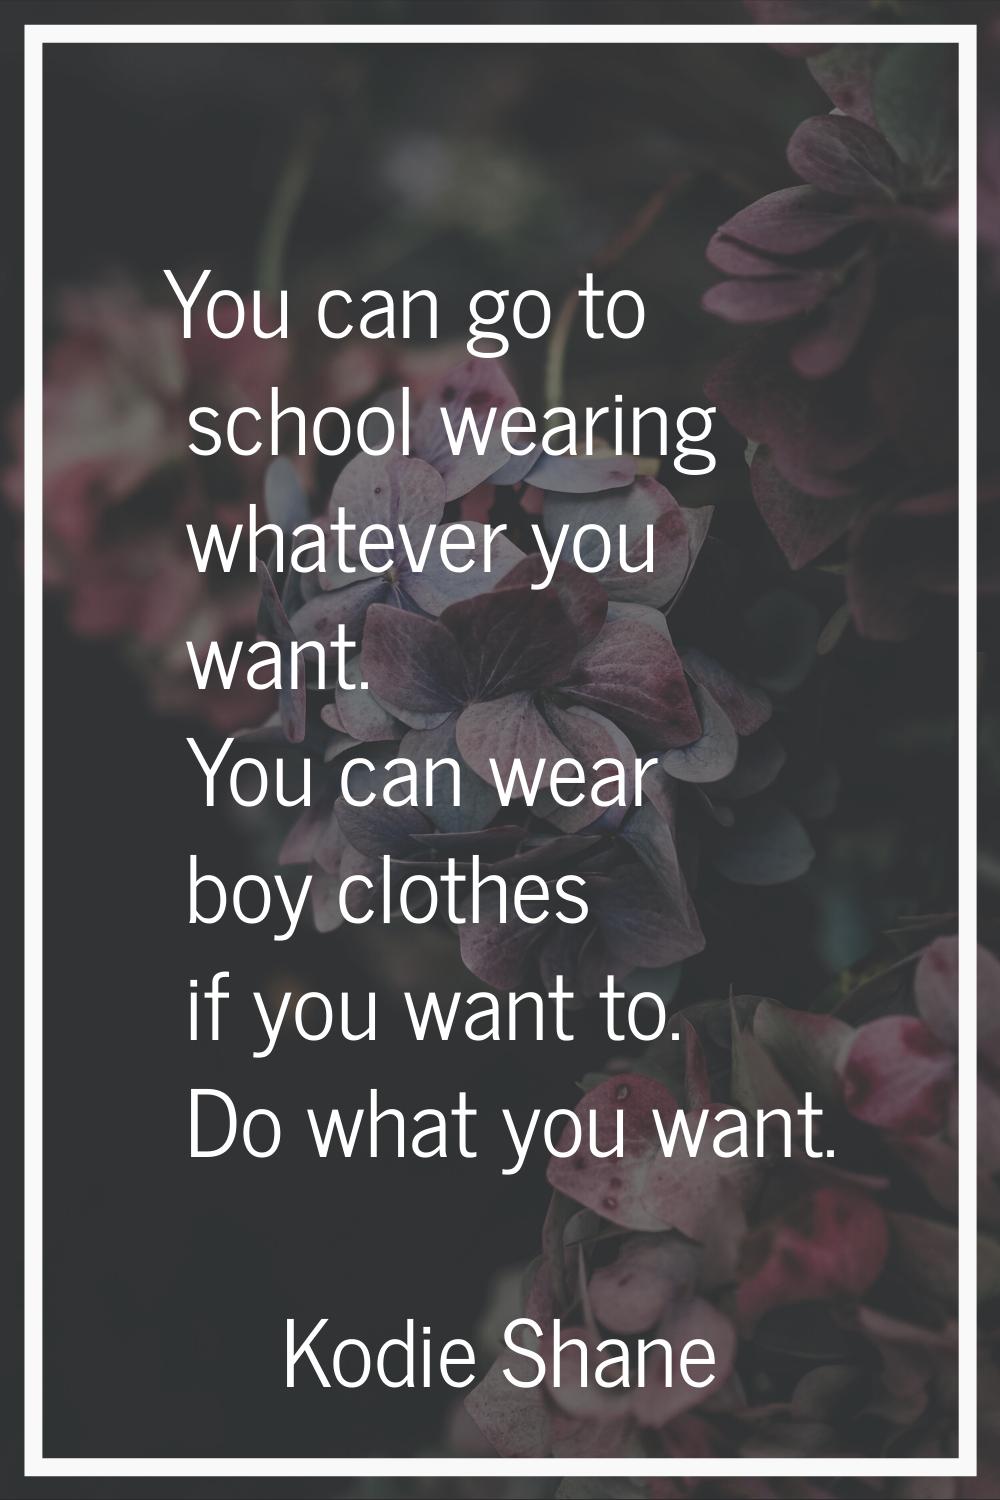 You can go to school wearing whatever you want. You can wear boy clothes if you want to. Do what yo